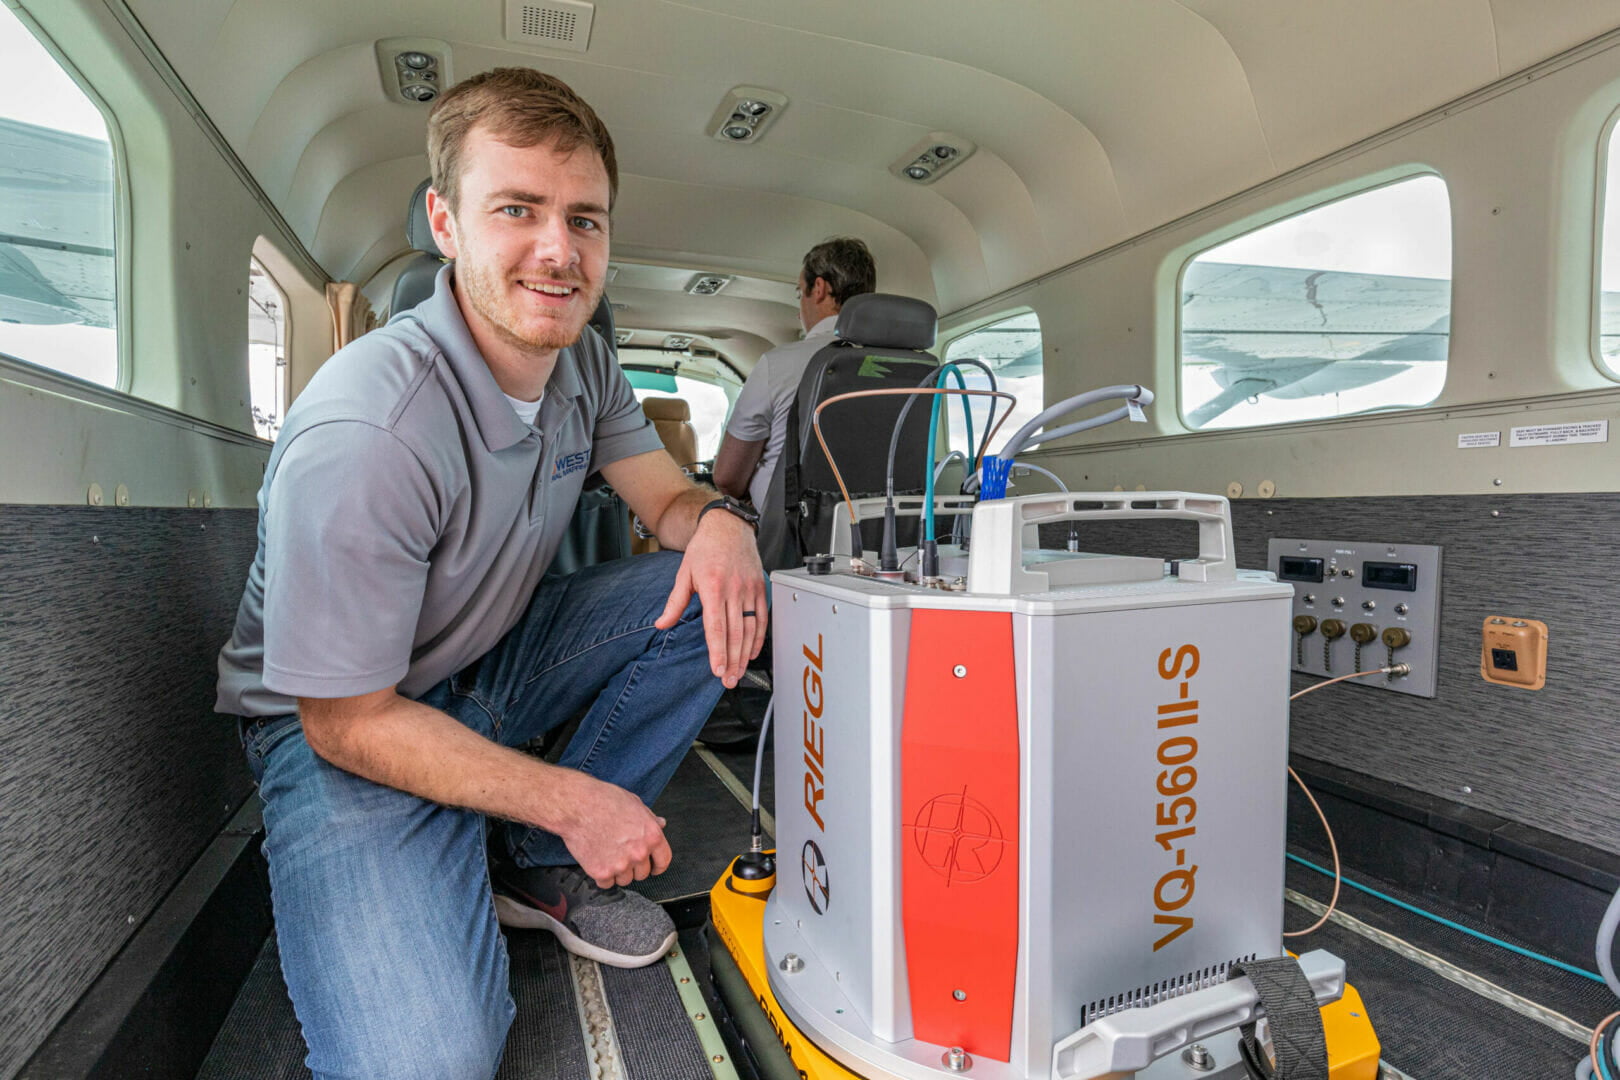 Andrew with Riegl VQ-1560 II-S LiDAR scanner